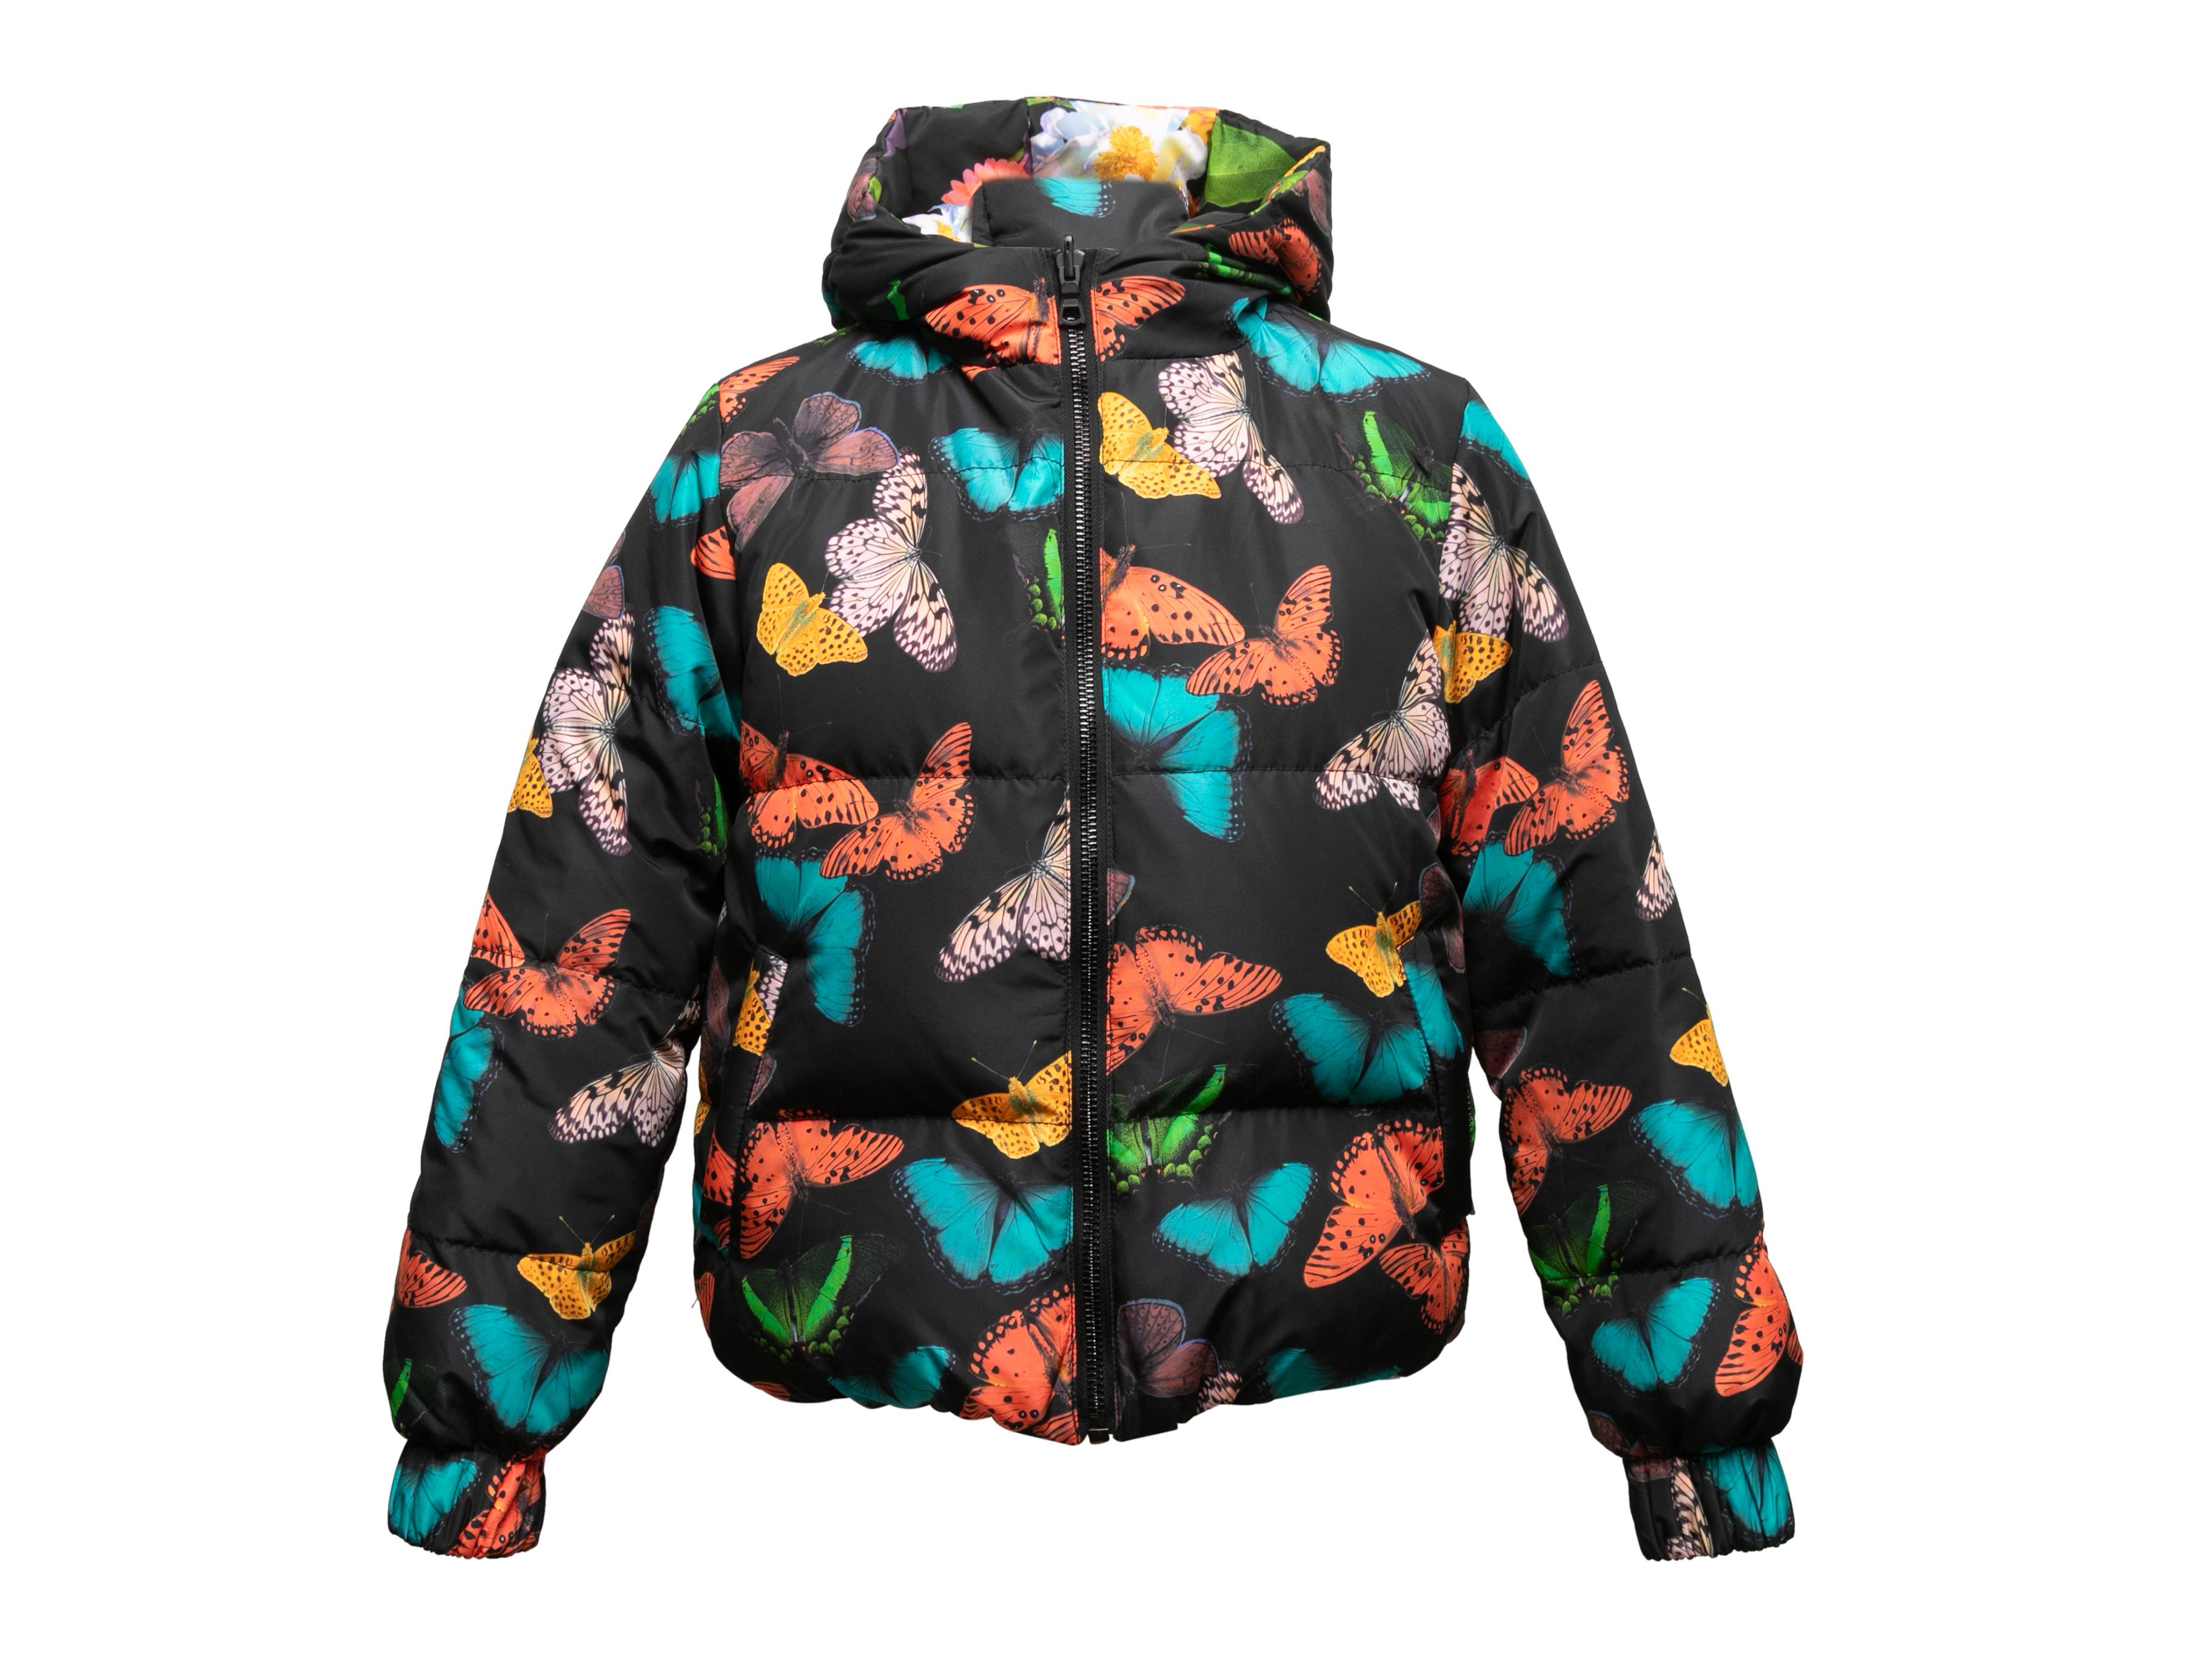 Multicolor reversible butterfly and floral print hooded puffer jacket by Alice + Olivia. Dual hip pockets. Front zip closure. 38